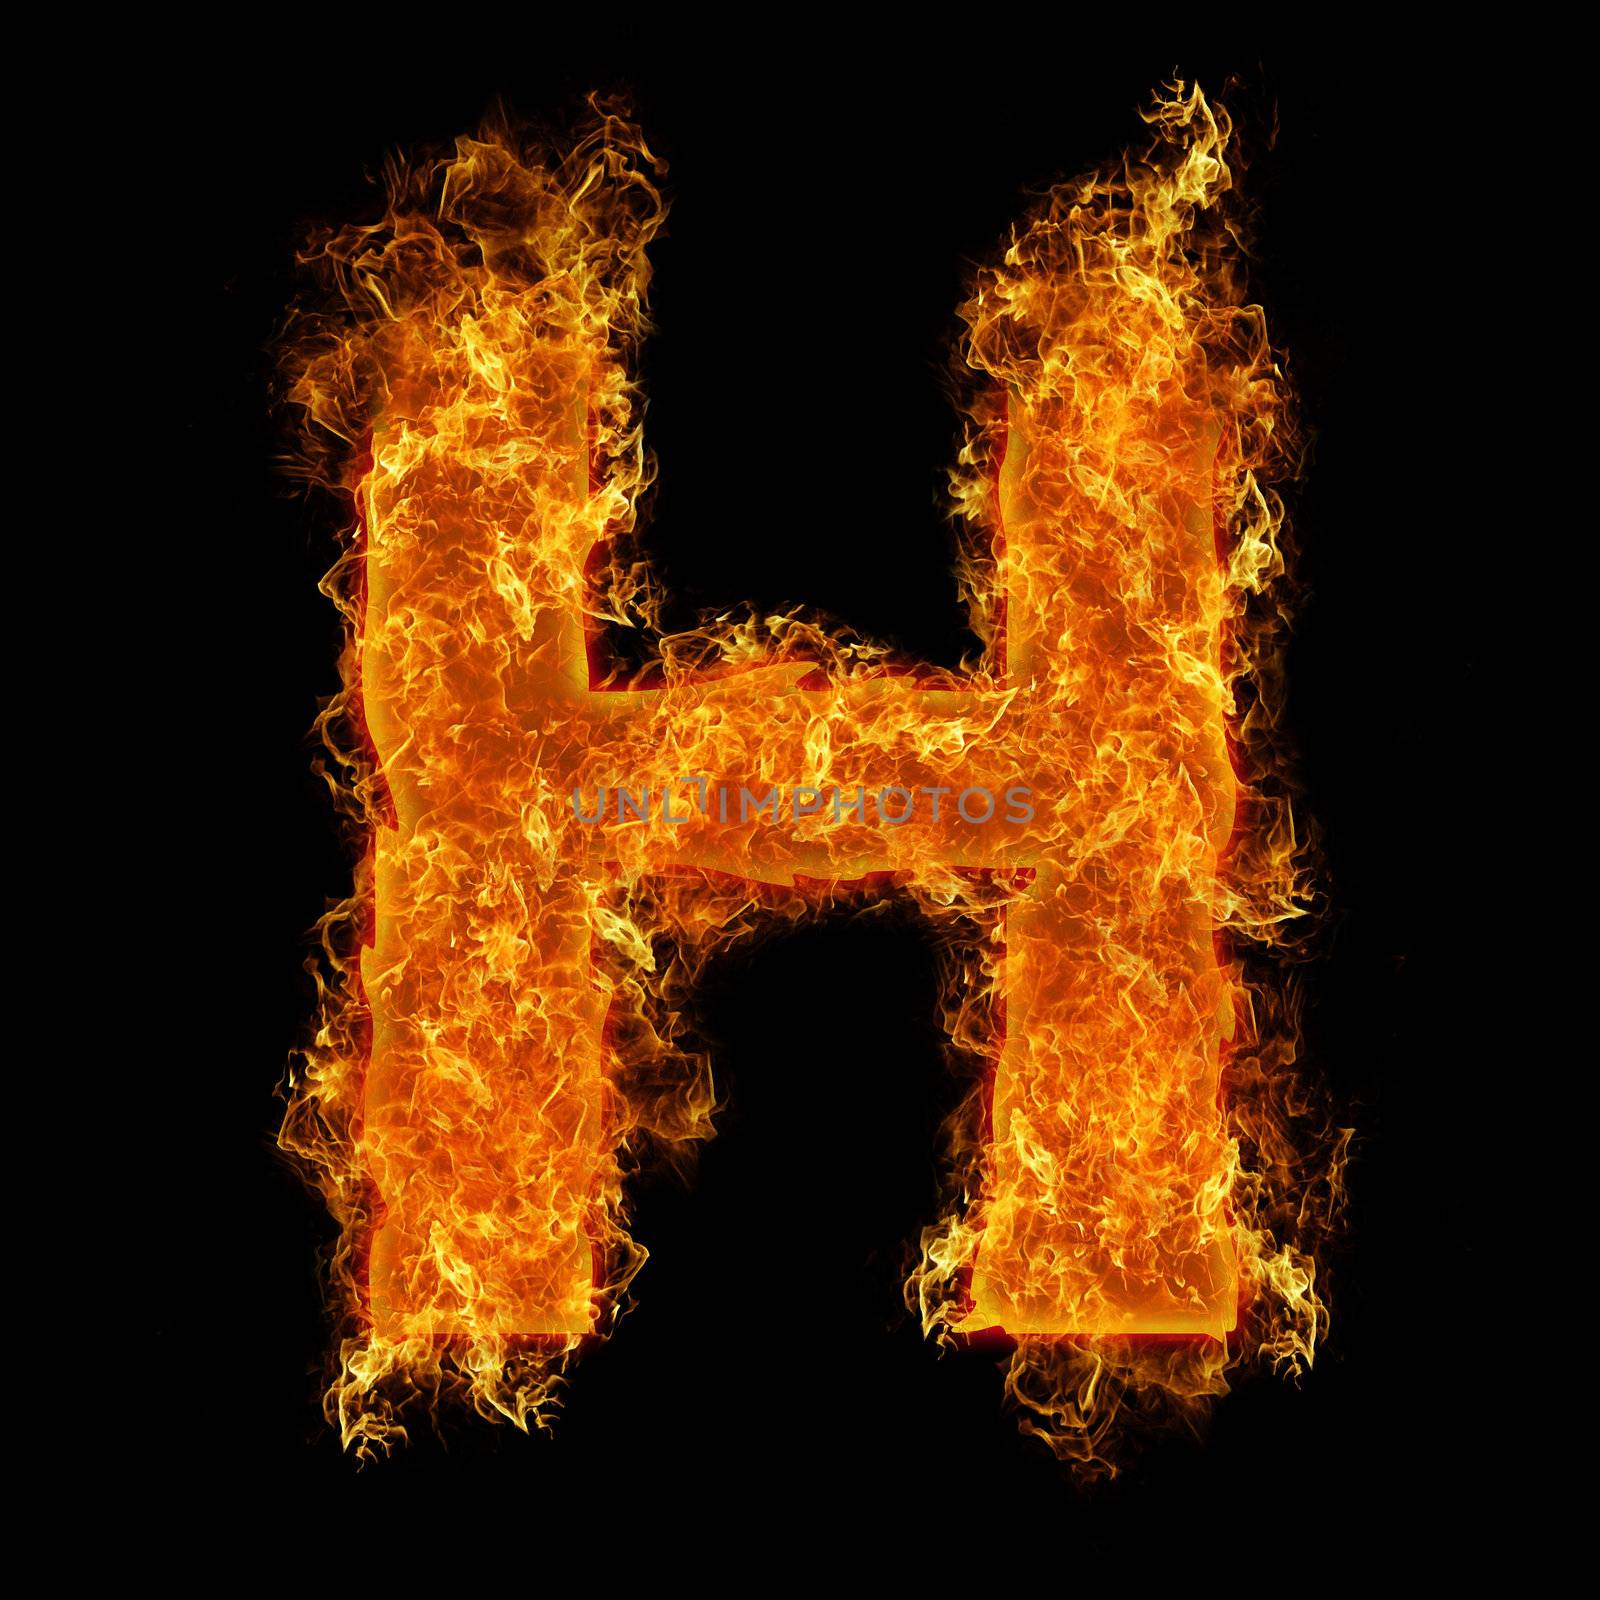 Fire letter H by rusak